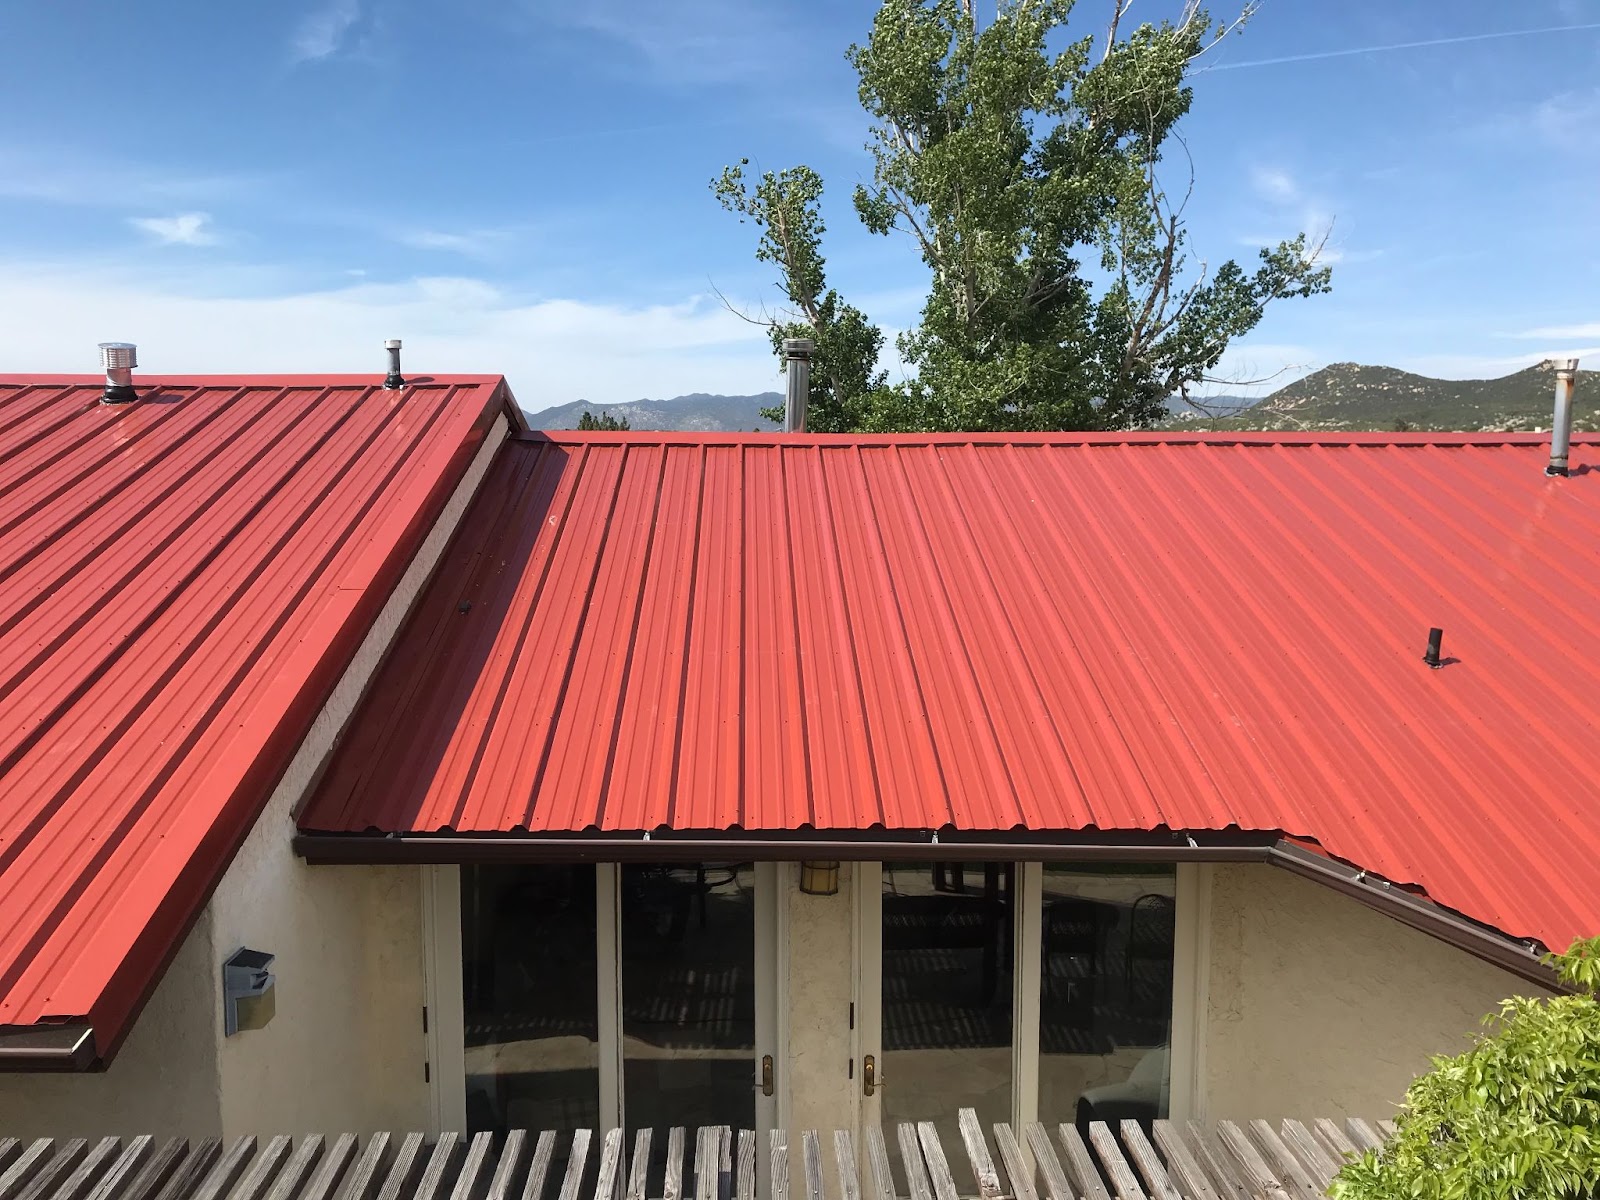 Is A Red Metal Roof Right For Me? Plus Design Ideas.